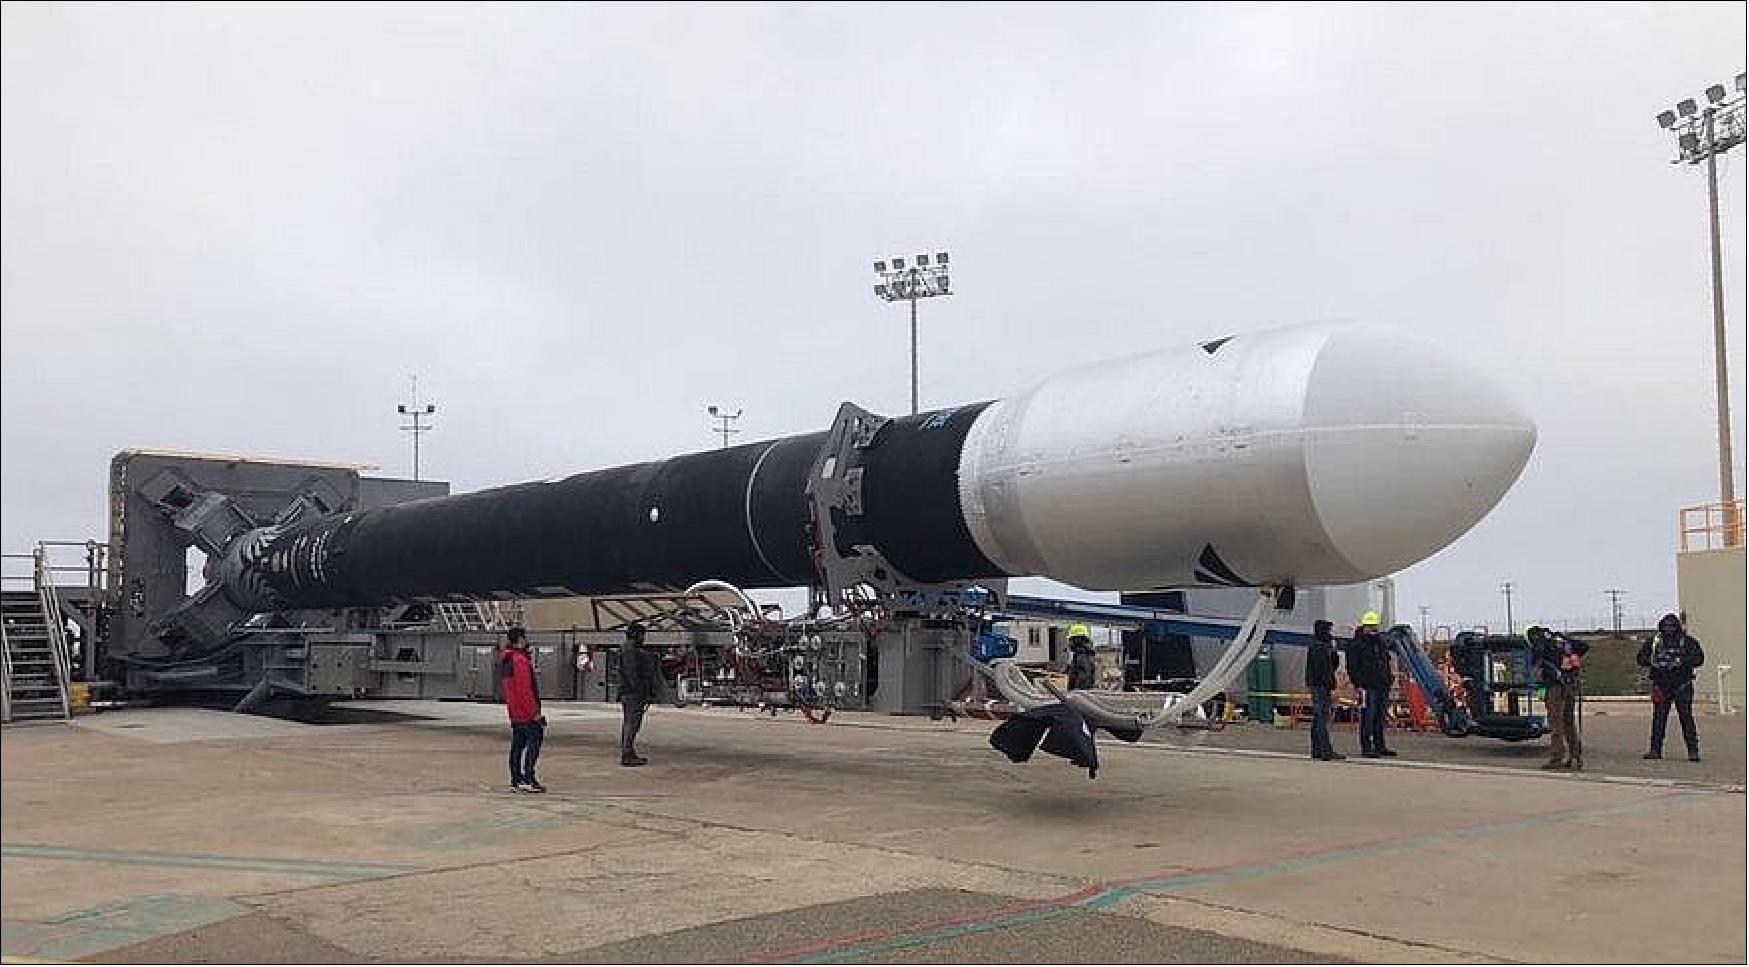 Figure 4: Firefly Aerospace's first Alpha rocket is at Vandenberg Air Force Base for a first launch in the next couple of months (image credit: Firefly Aerospace)